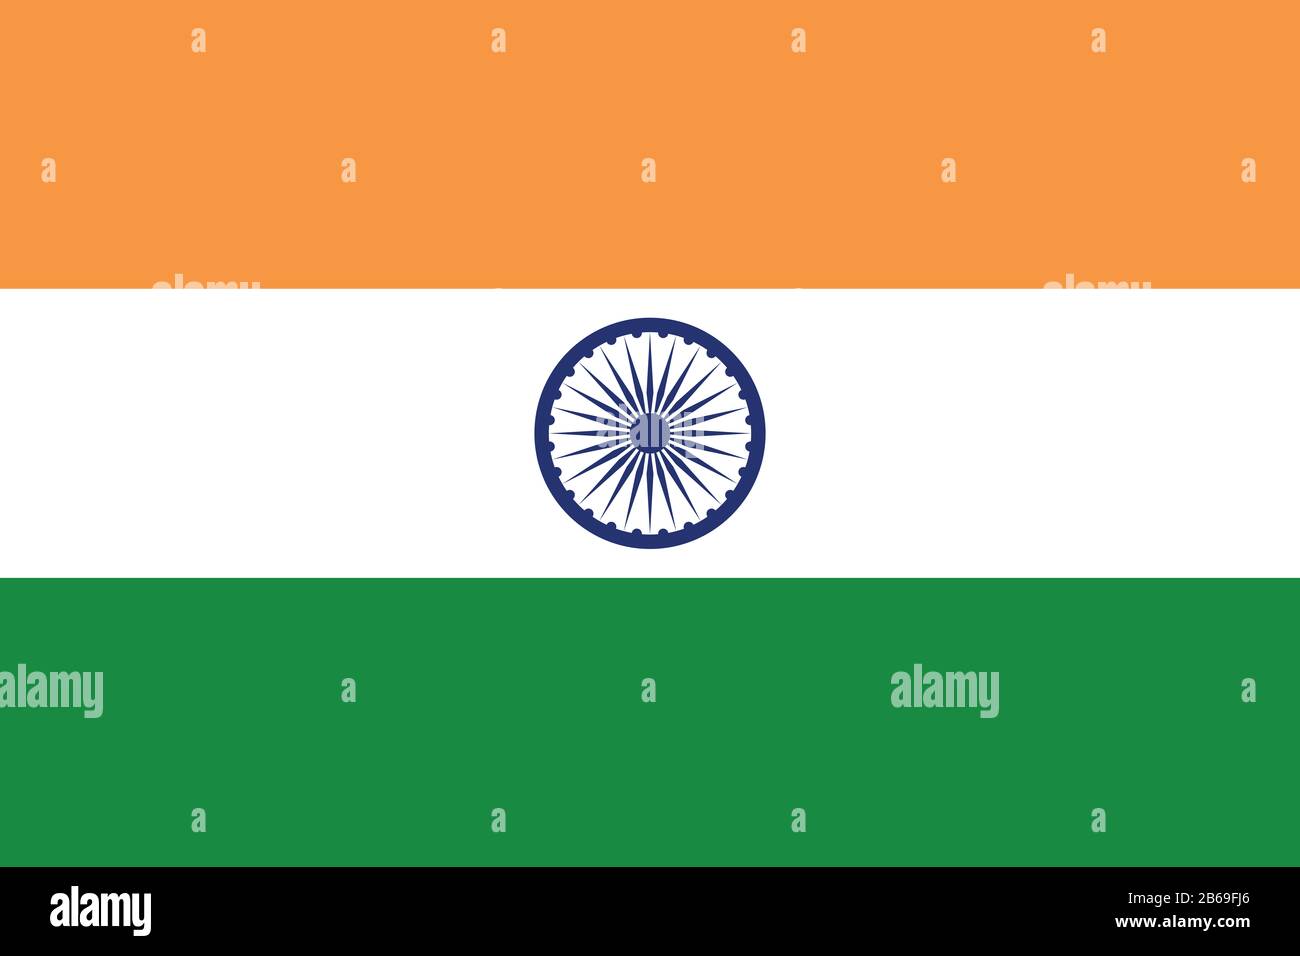 Flag of India - Indian flag standard ratio - true RGB color mode Stock Photo